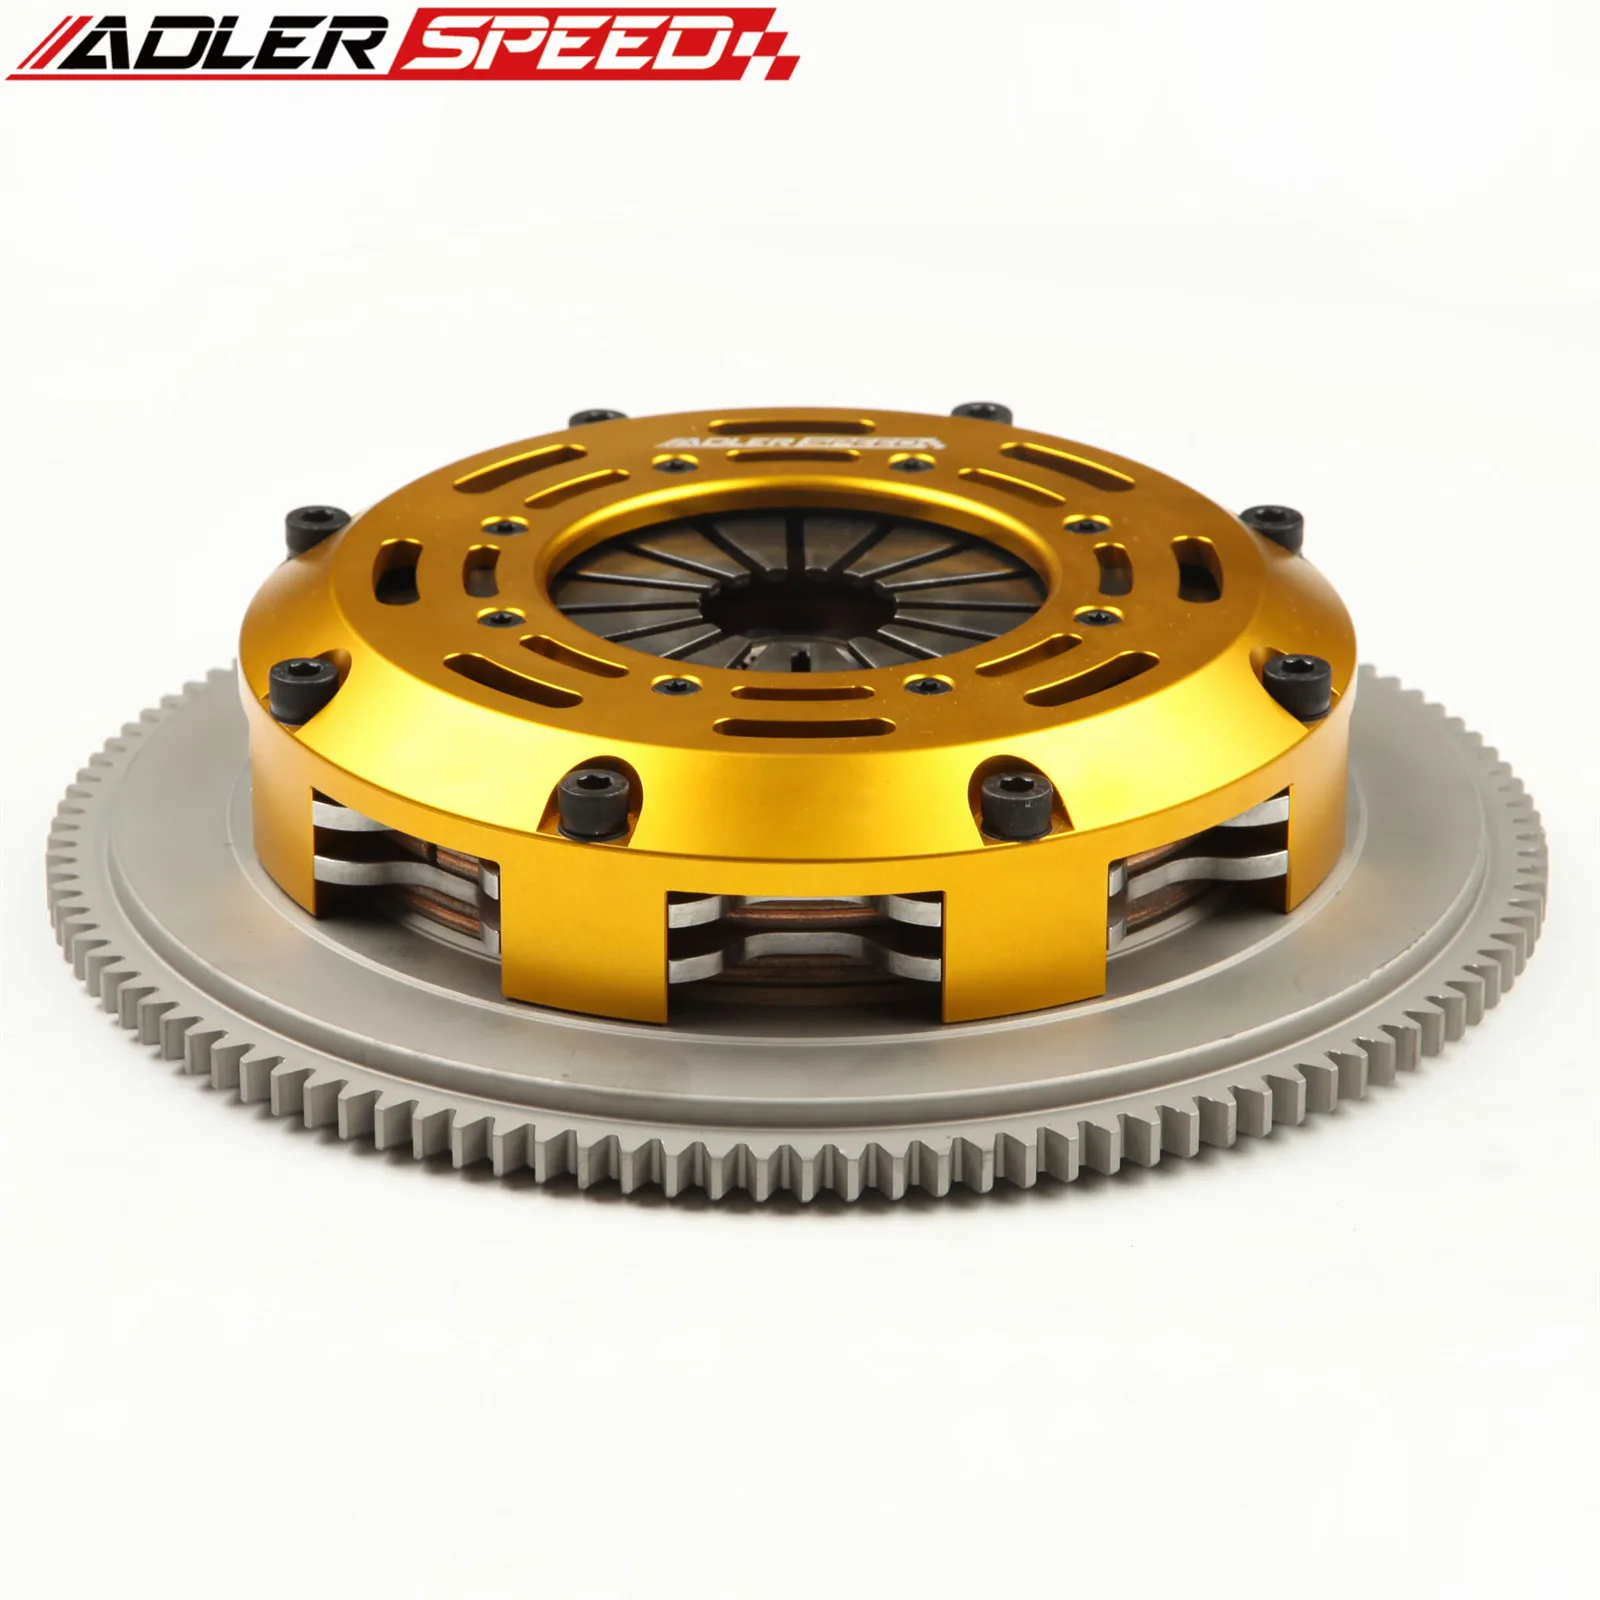 

ADLERSPEED RACING CLUTCH TWIN DISC KIT & FLYWHEEL For 93-97 Ford Probe For 93-03 Mazda MX-6 626 Mazdaspeed Protege Protege5 2.0L